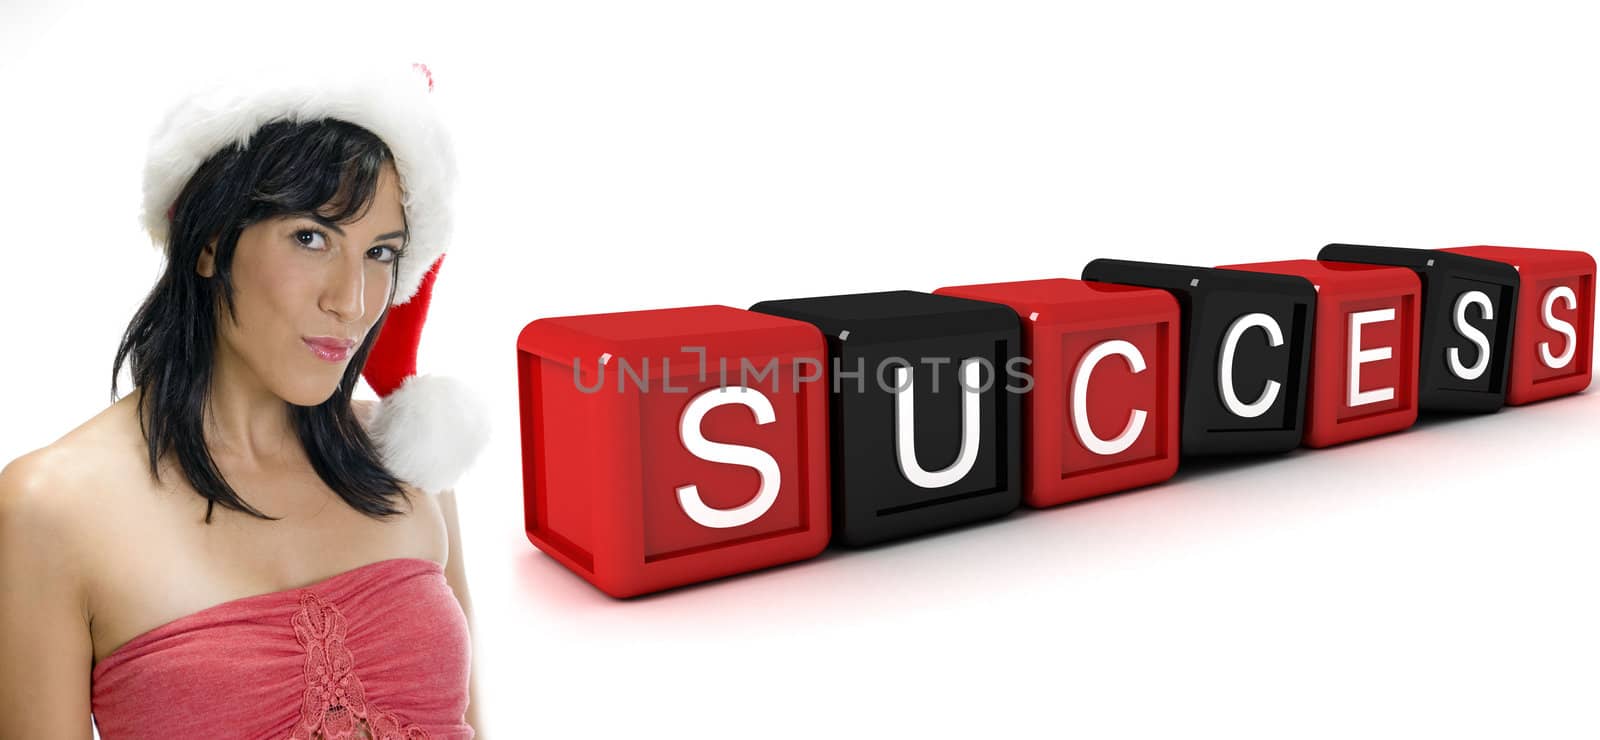 three dimensional building blocks with success text and woman with santa hat and  on an isolated white background